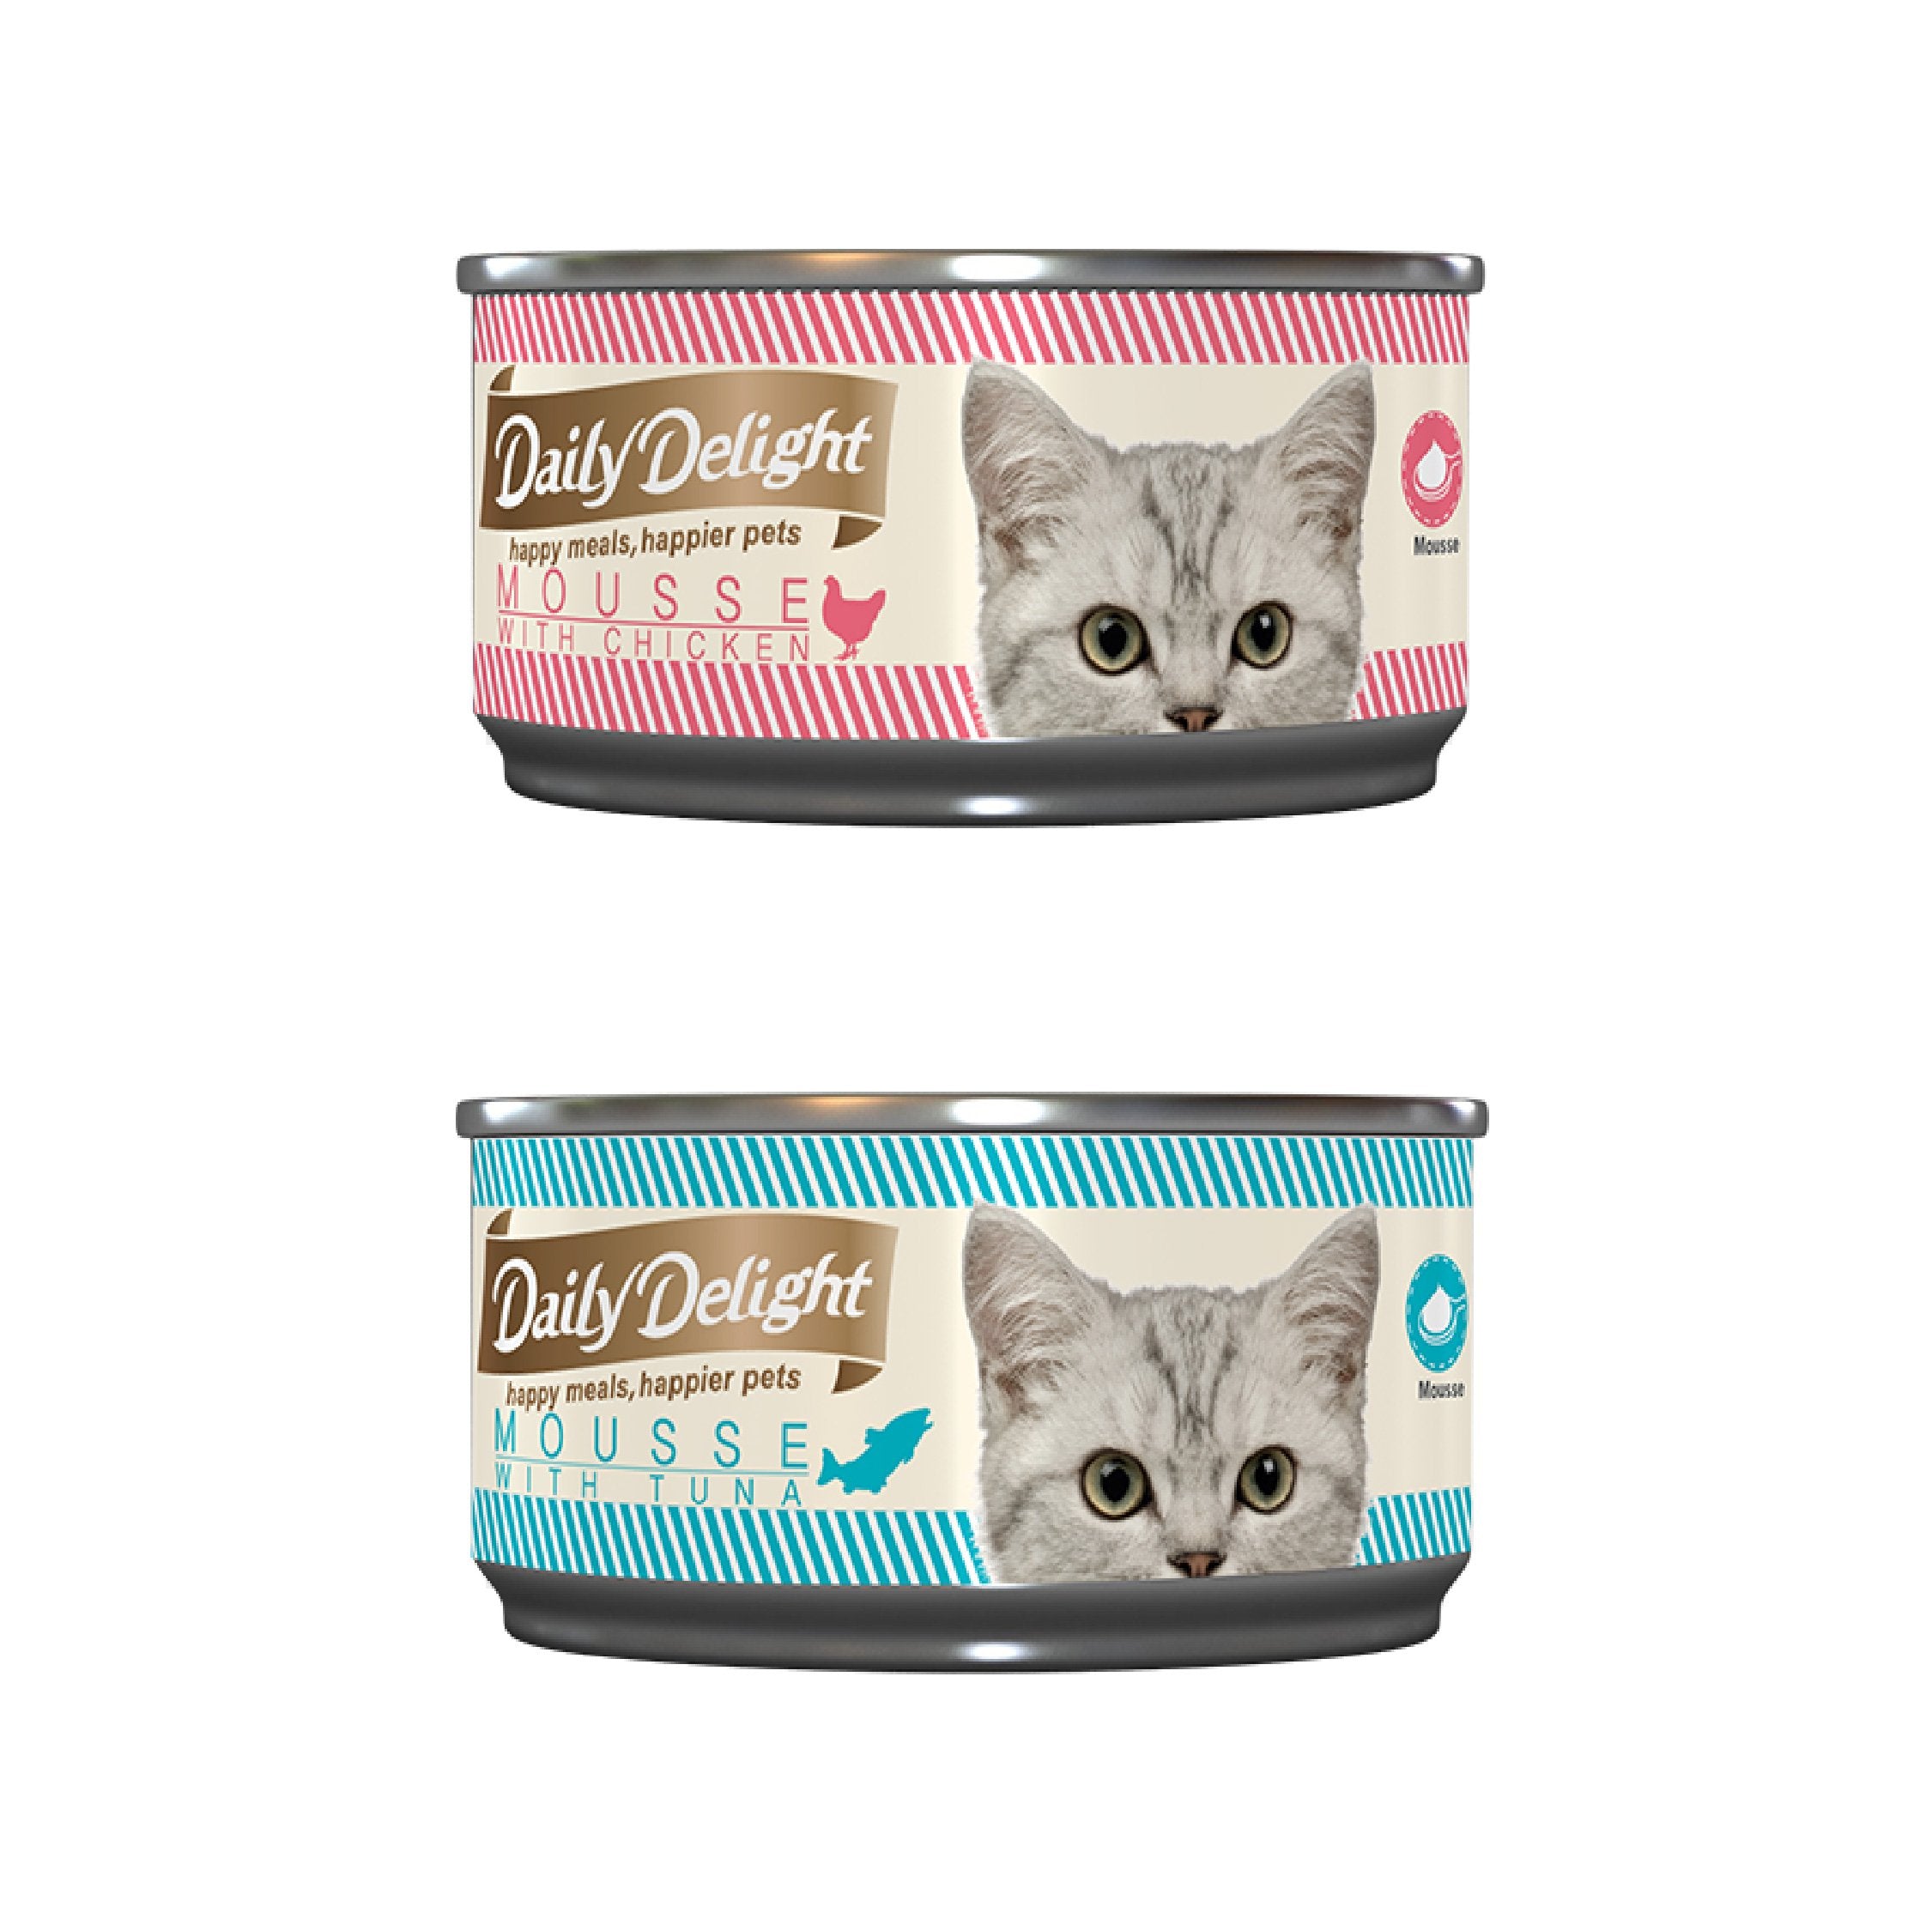 Daily Delight Canned Wet Food For Cats 80g (Mousse Range) - 2 Flavours